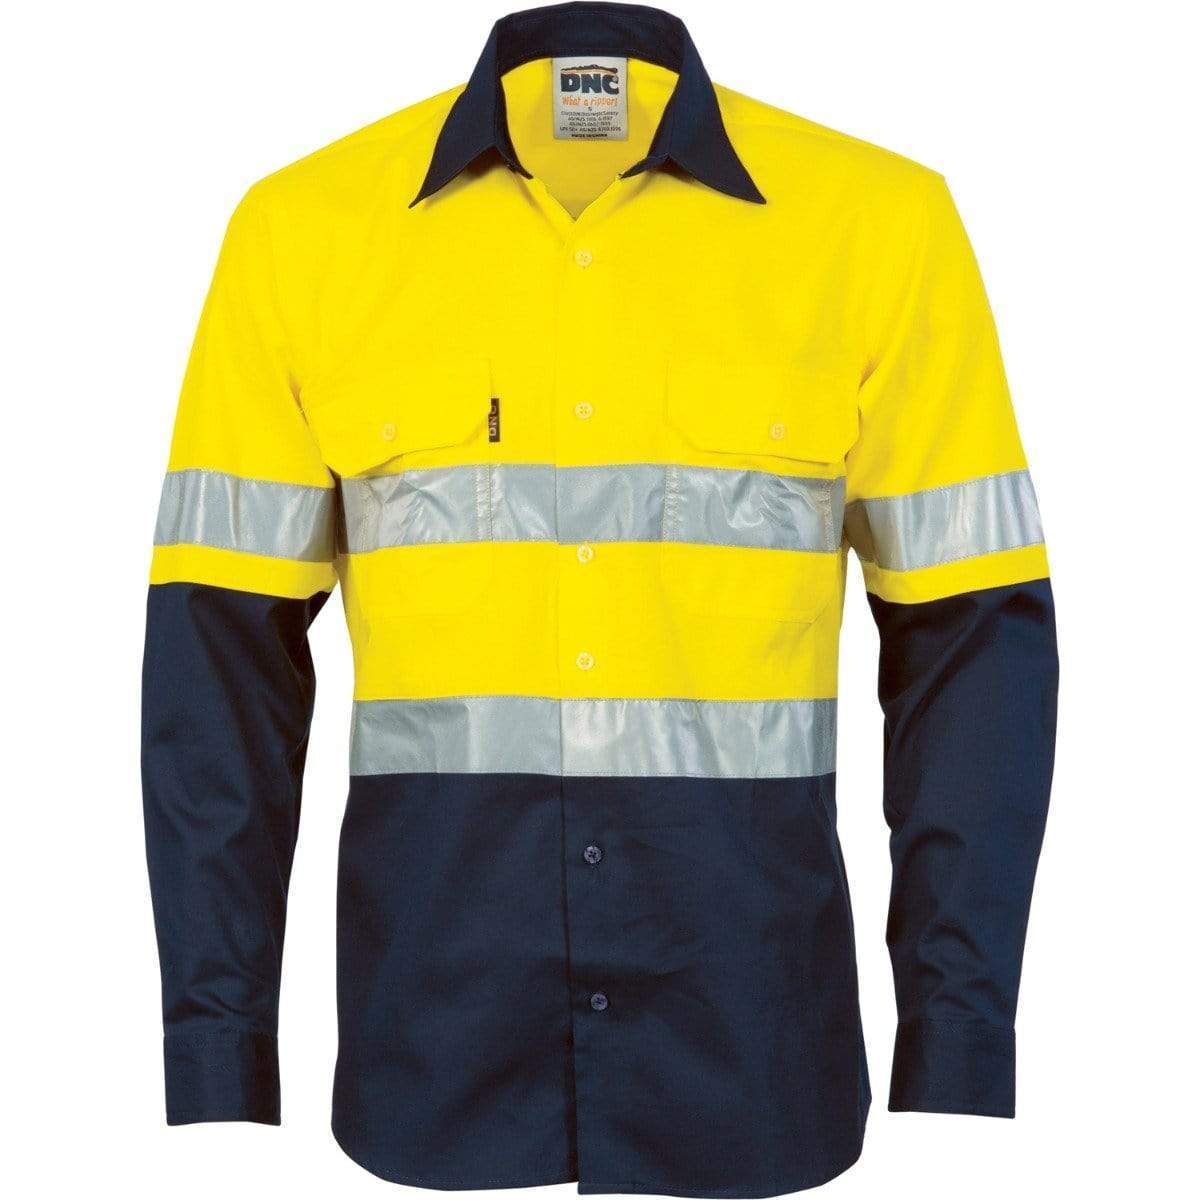 Dnc Workwear Hi-vis Cool-breeze Vertical Vented Long Sleeve Cotton Shirt With Generic Reflective Tape - 3984 Work Wear DNC Workwear Yellow/Navy XS 